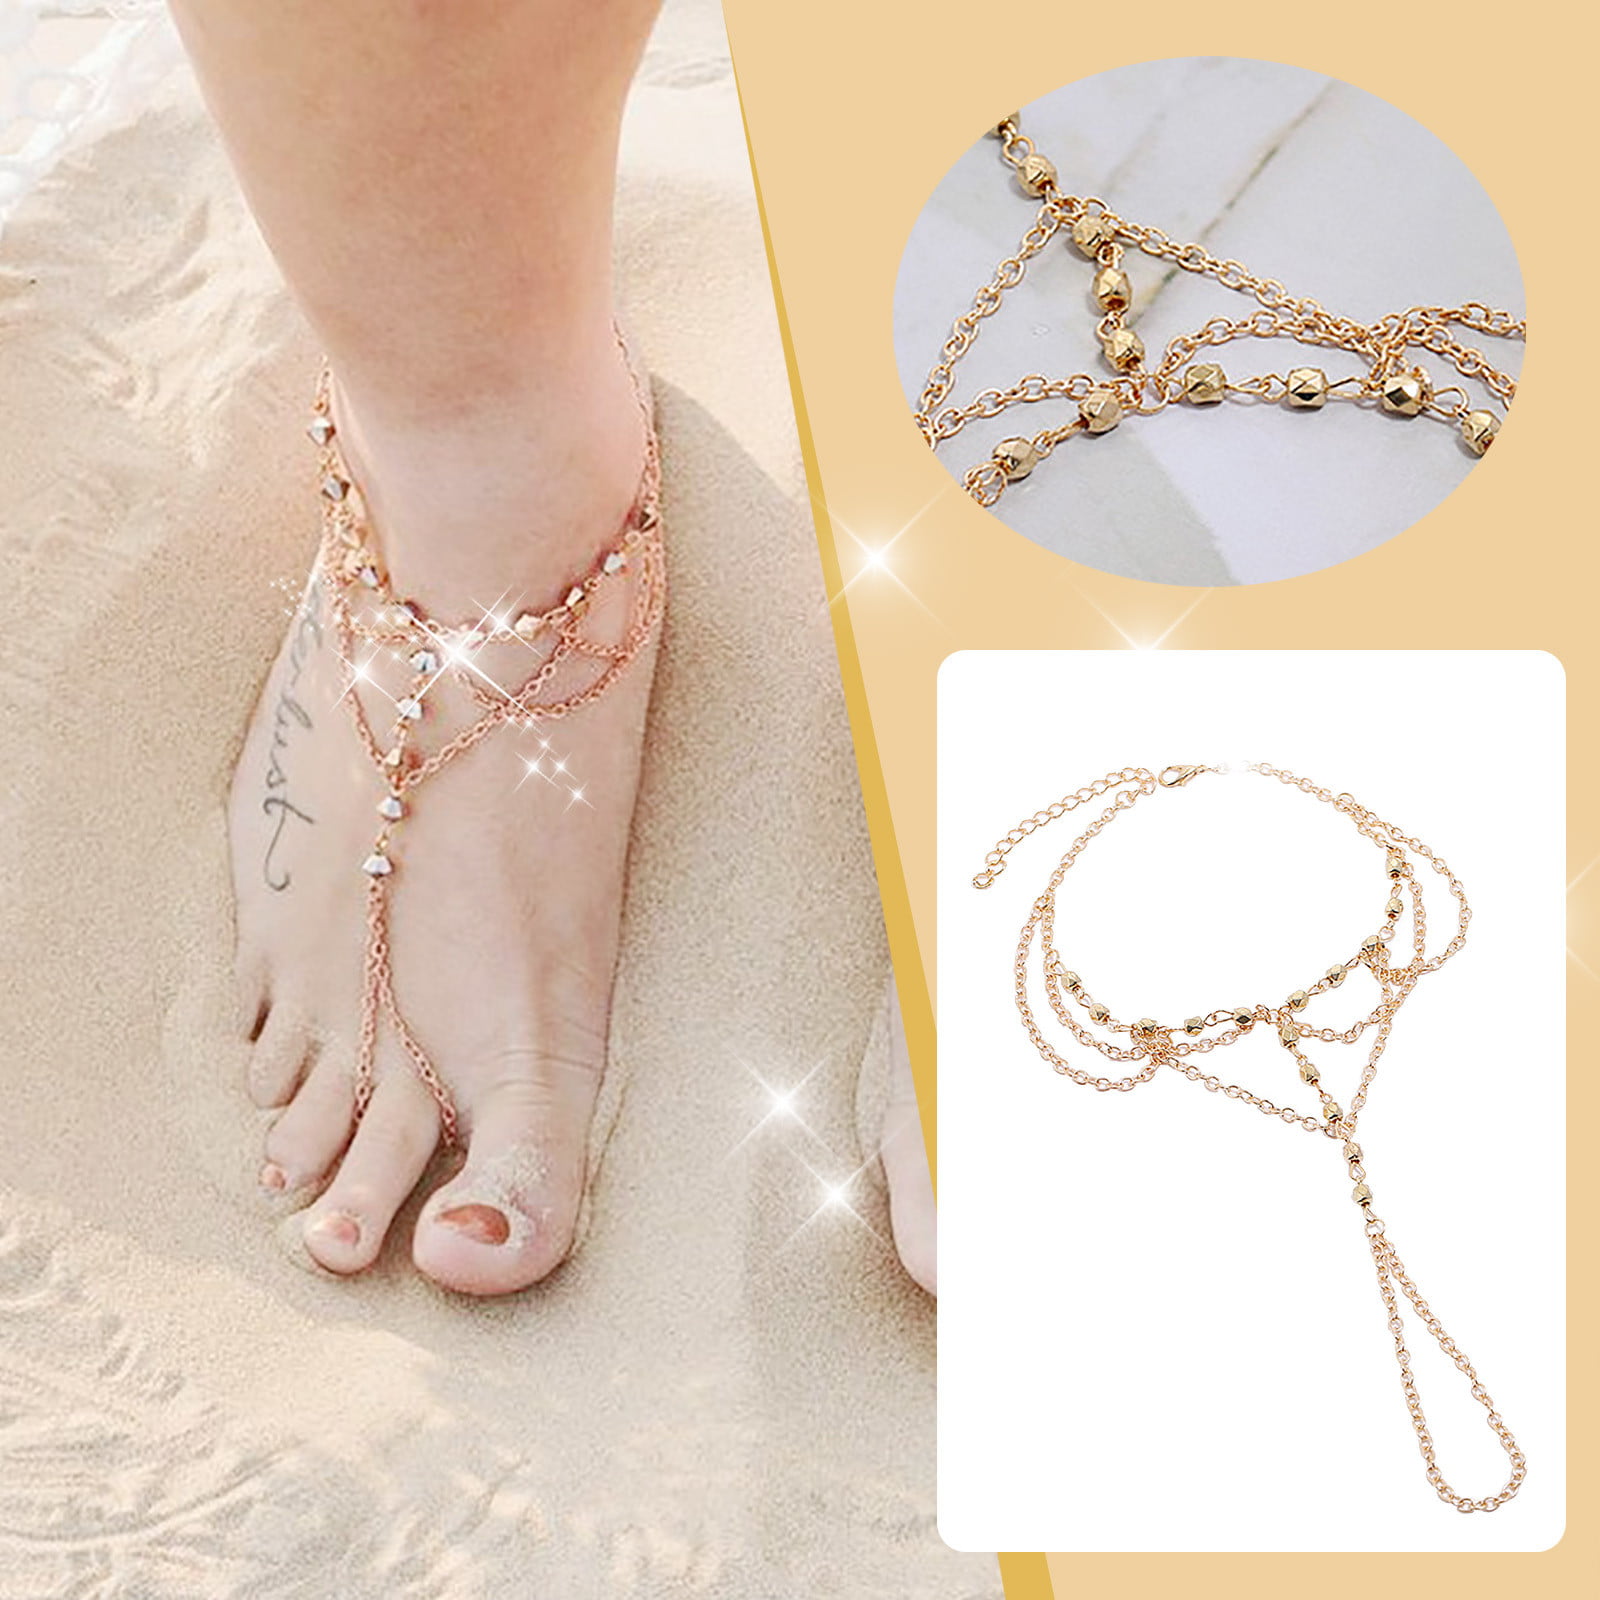 Anklet - Wikipedia